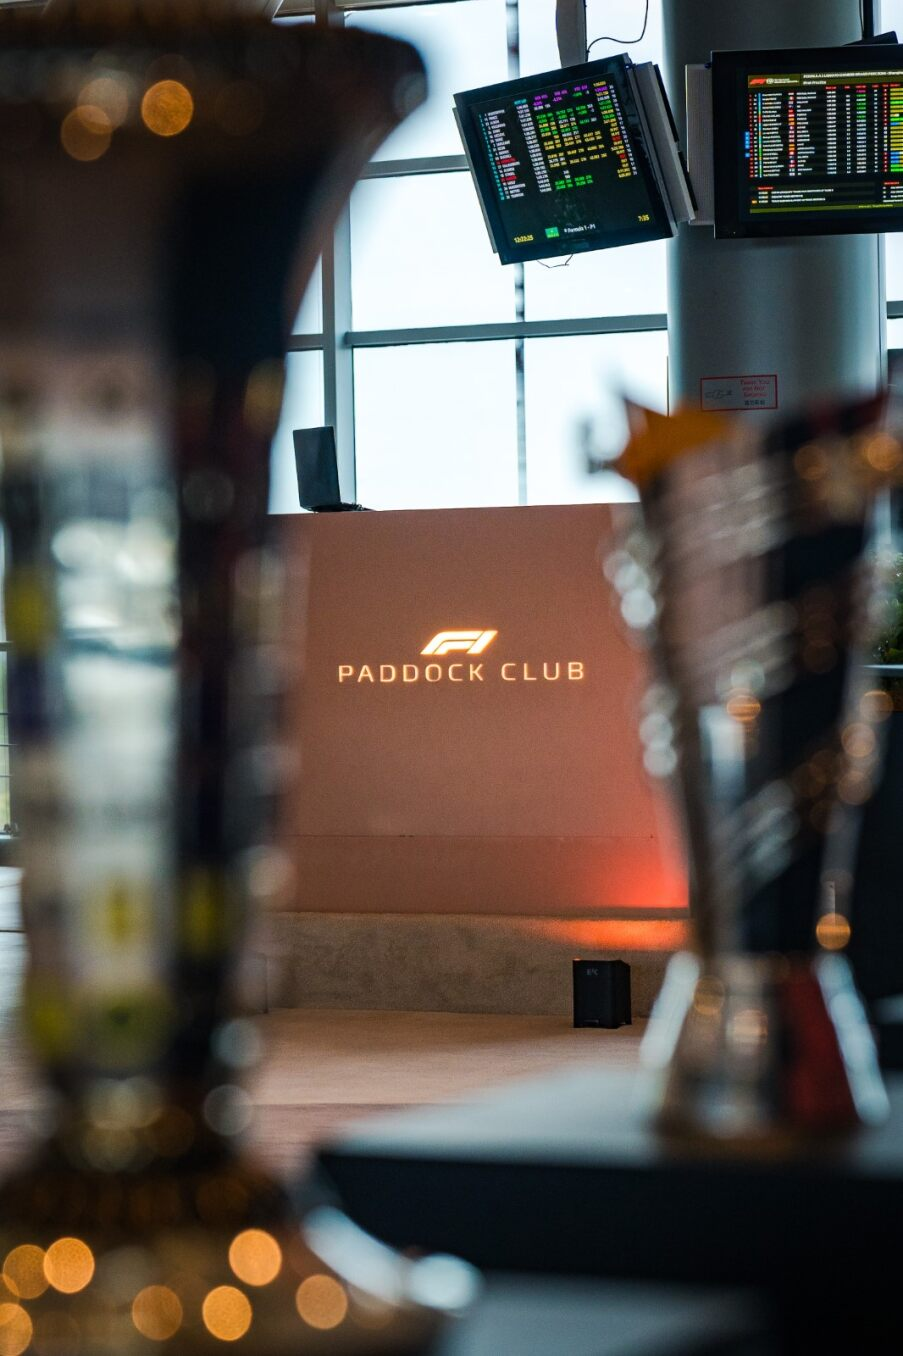 The Shanghai Paddock Club offers exclusive viewing points from atop the F1 garages. Photo: F1